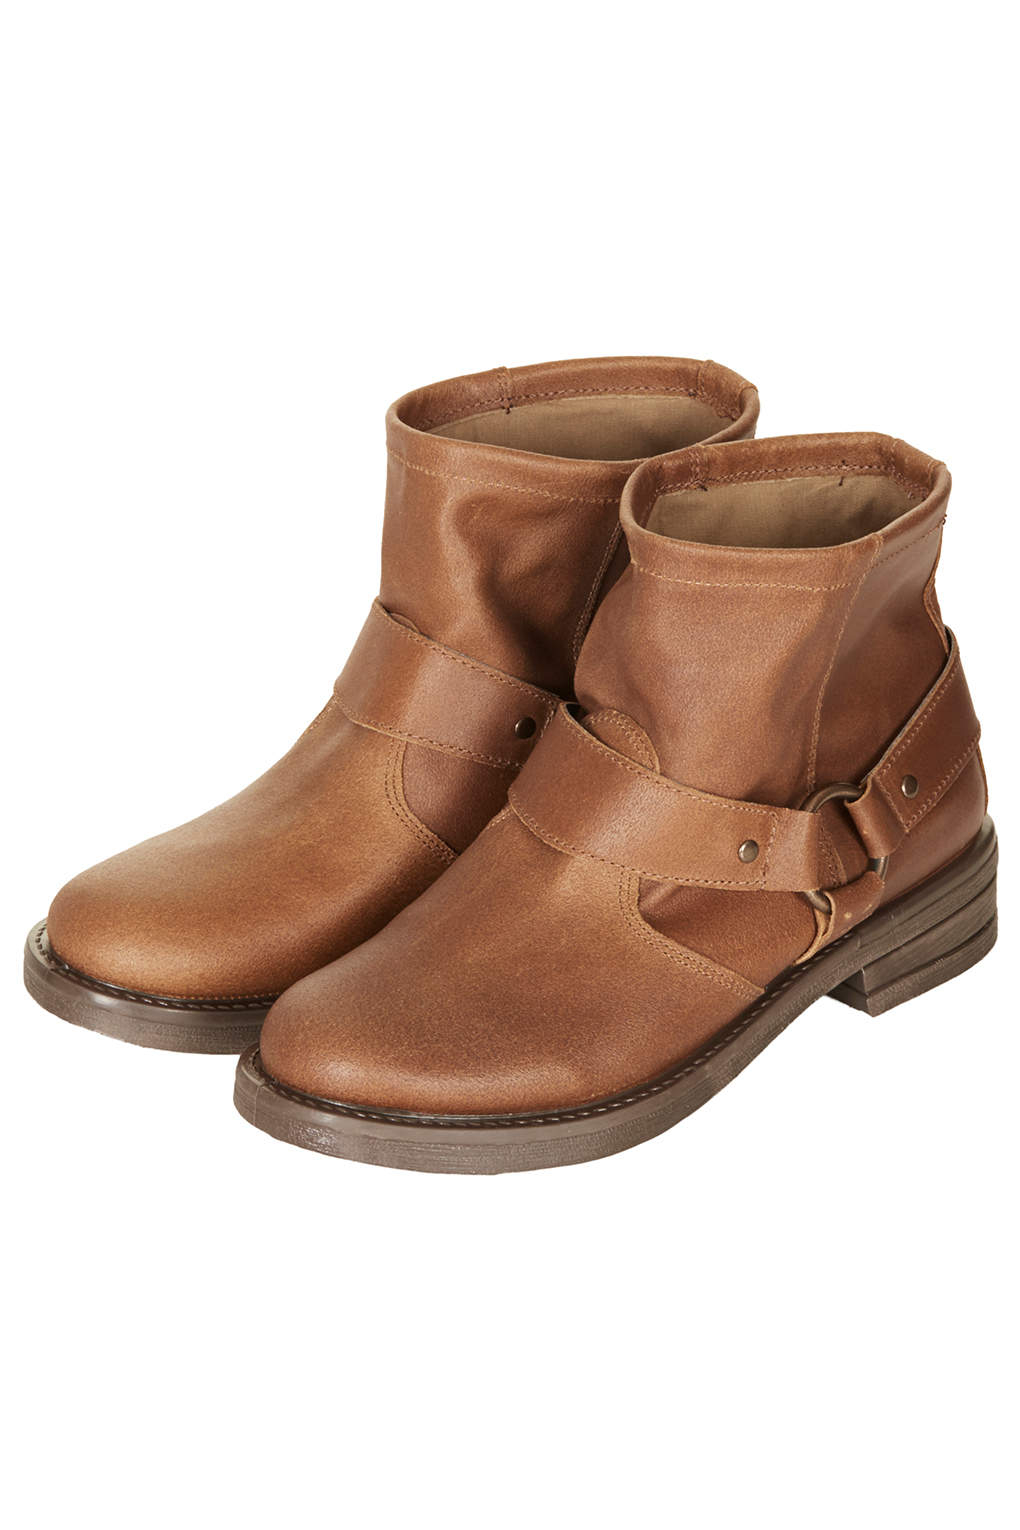 Topshop Buster Harness Biker Boots in Brown (TAN) | Lyst